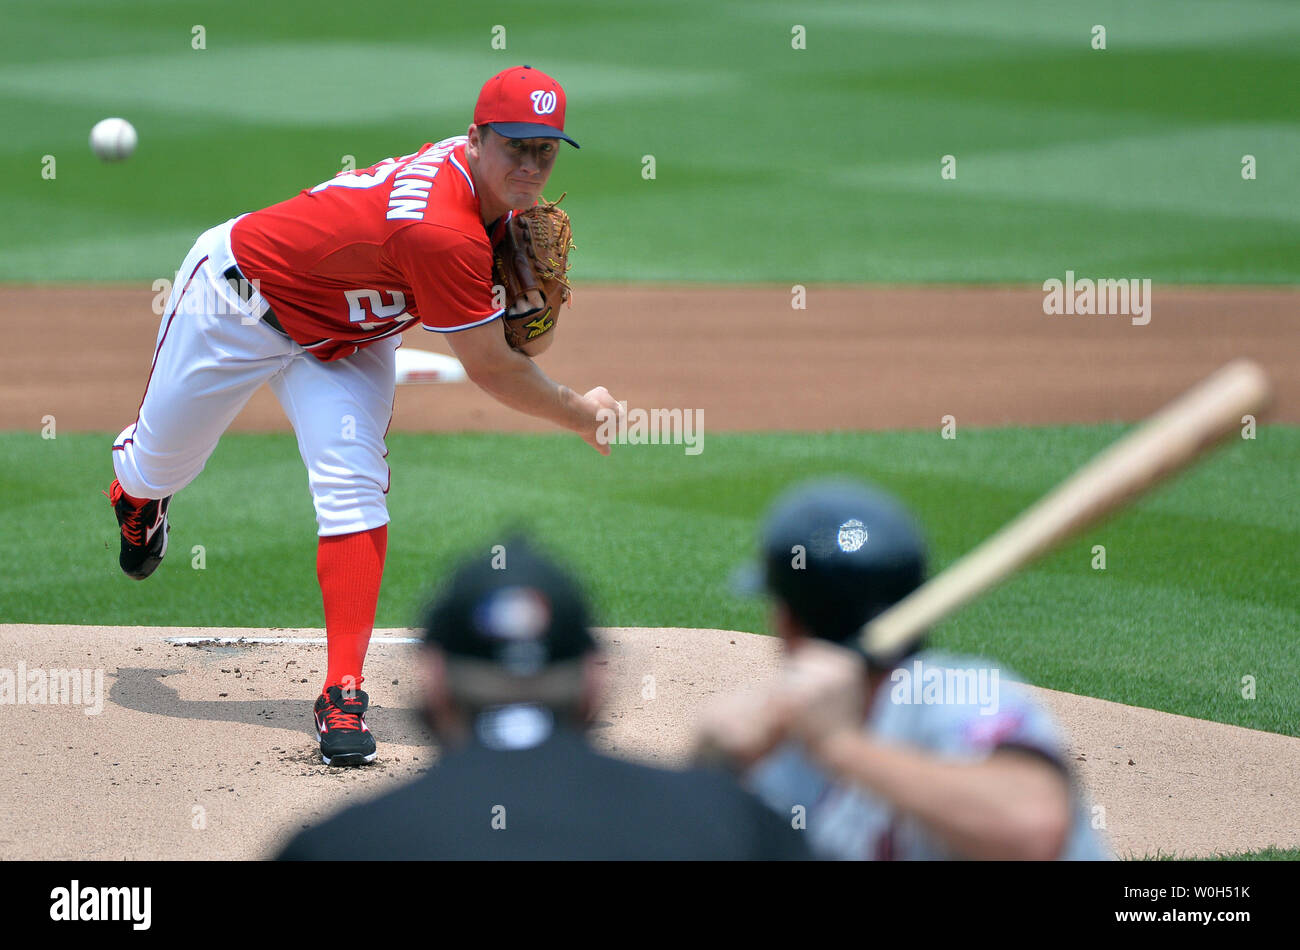 Washington Nationals pitcher Jordan Zimmermann pitches against the Minnesota Twins during the first inning at Nationals Park in Washington, D.C. on June 9, 2013.  UPI/Kevin Dietsch Stock Photo